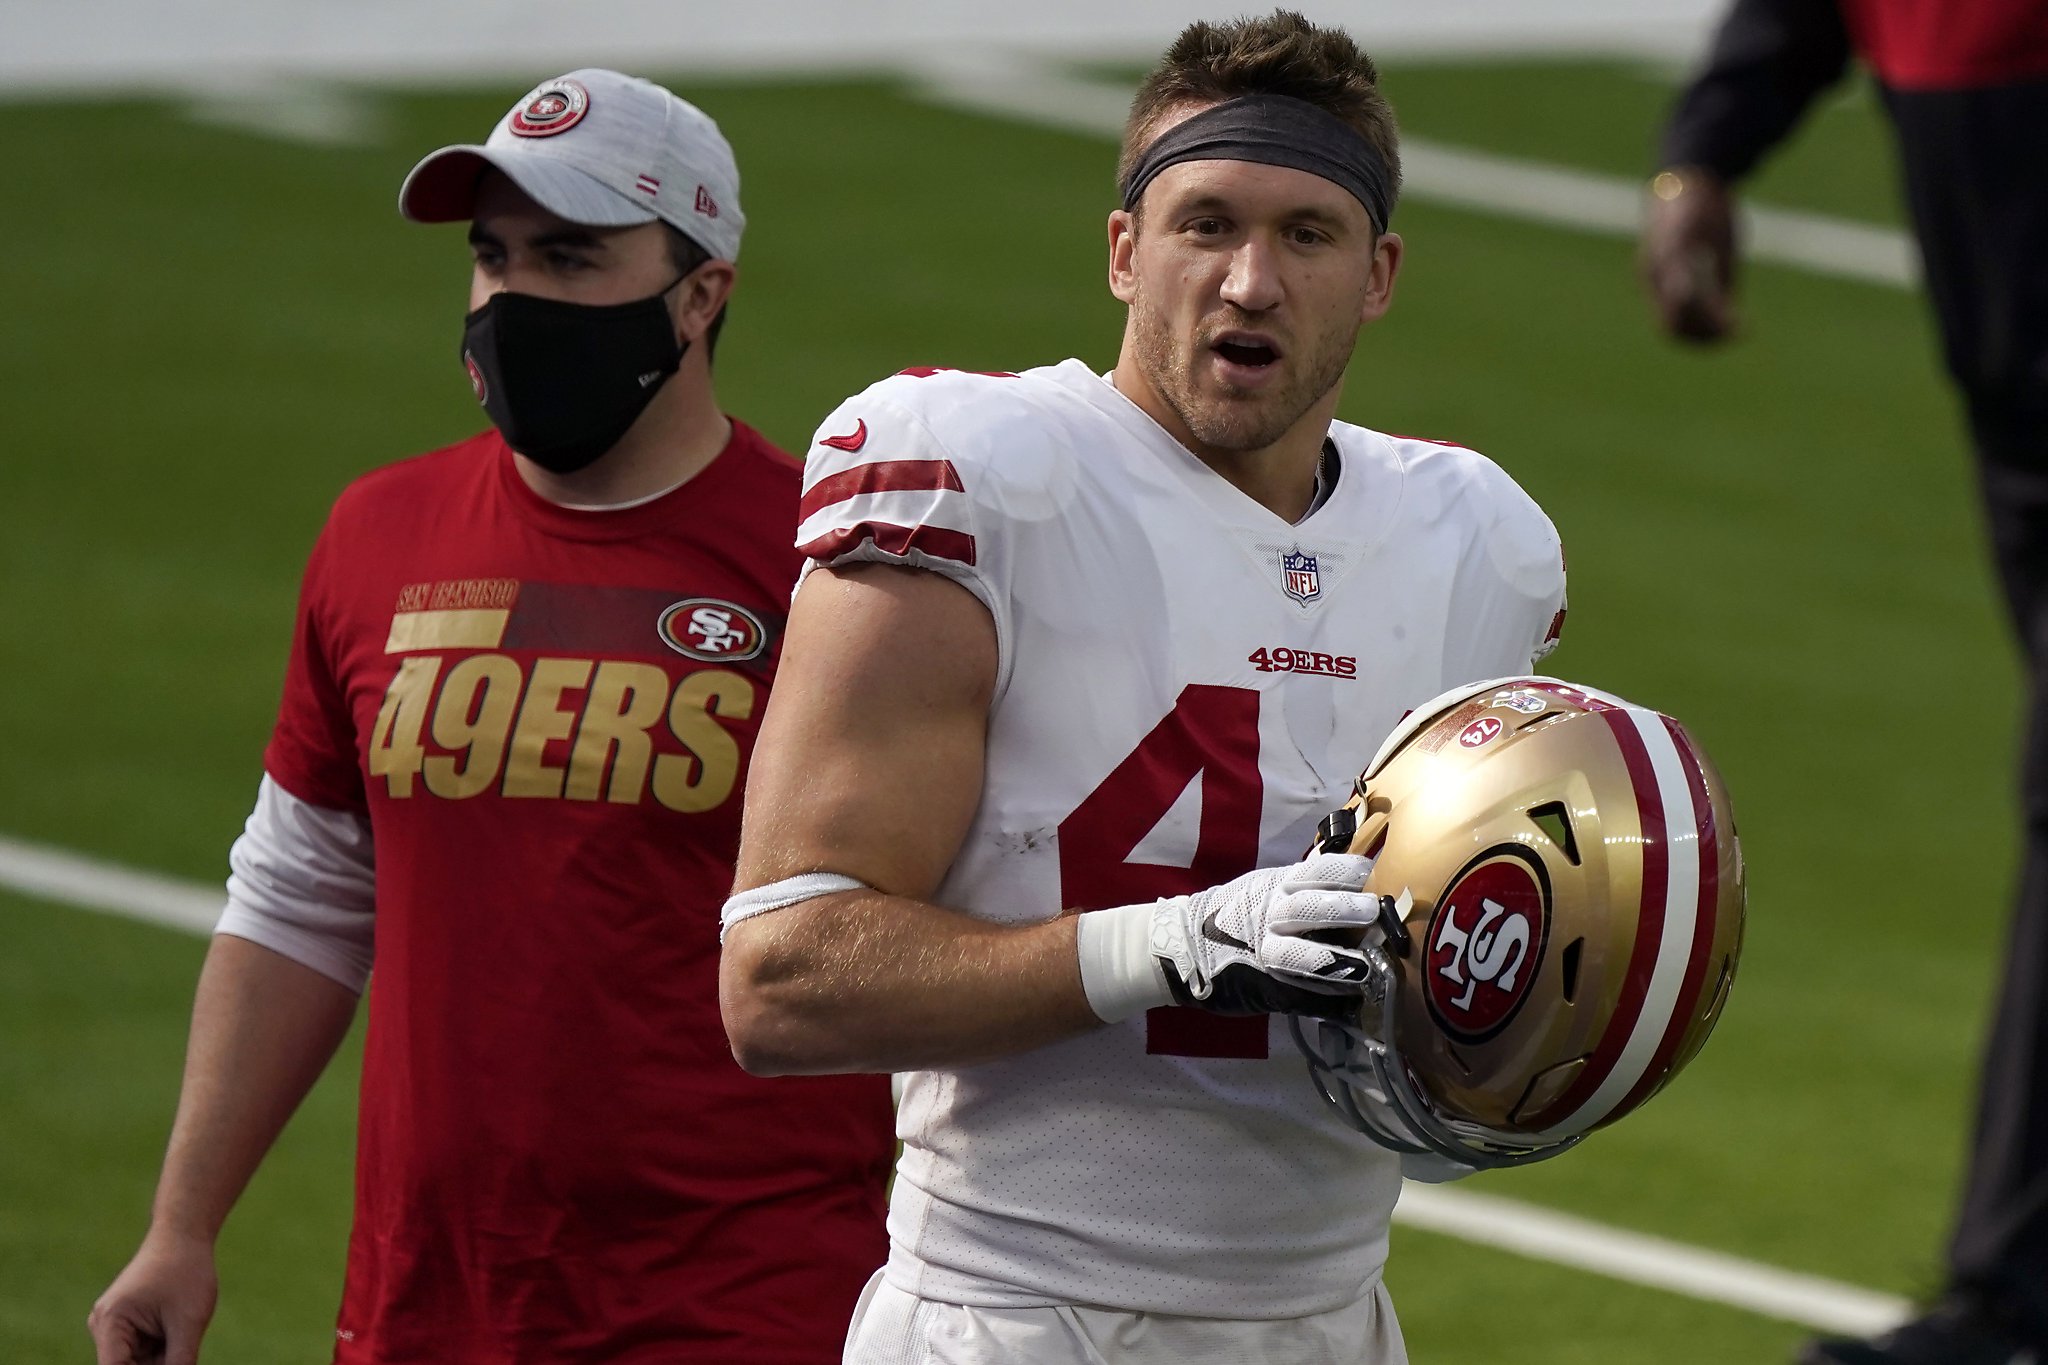 49ers, Kyle Juszczyk agrees to the five-year extension, $ 27 million